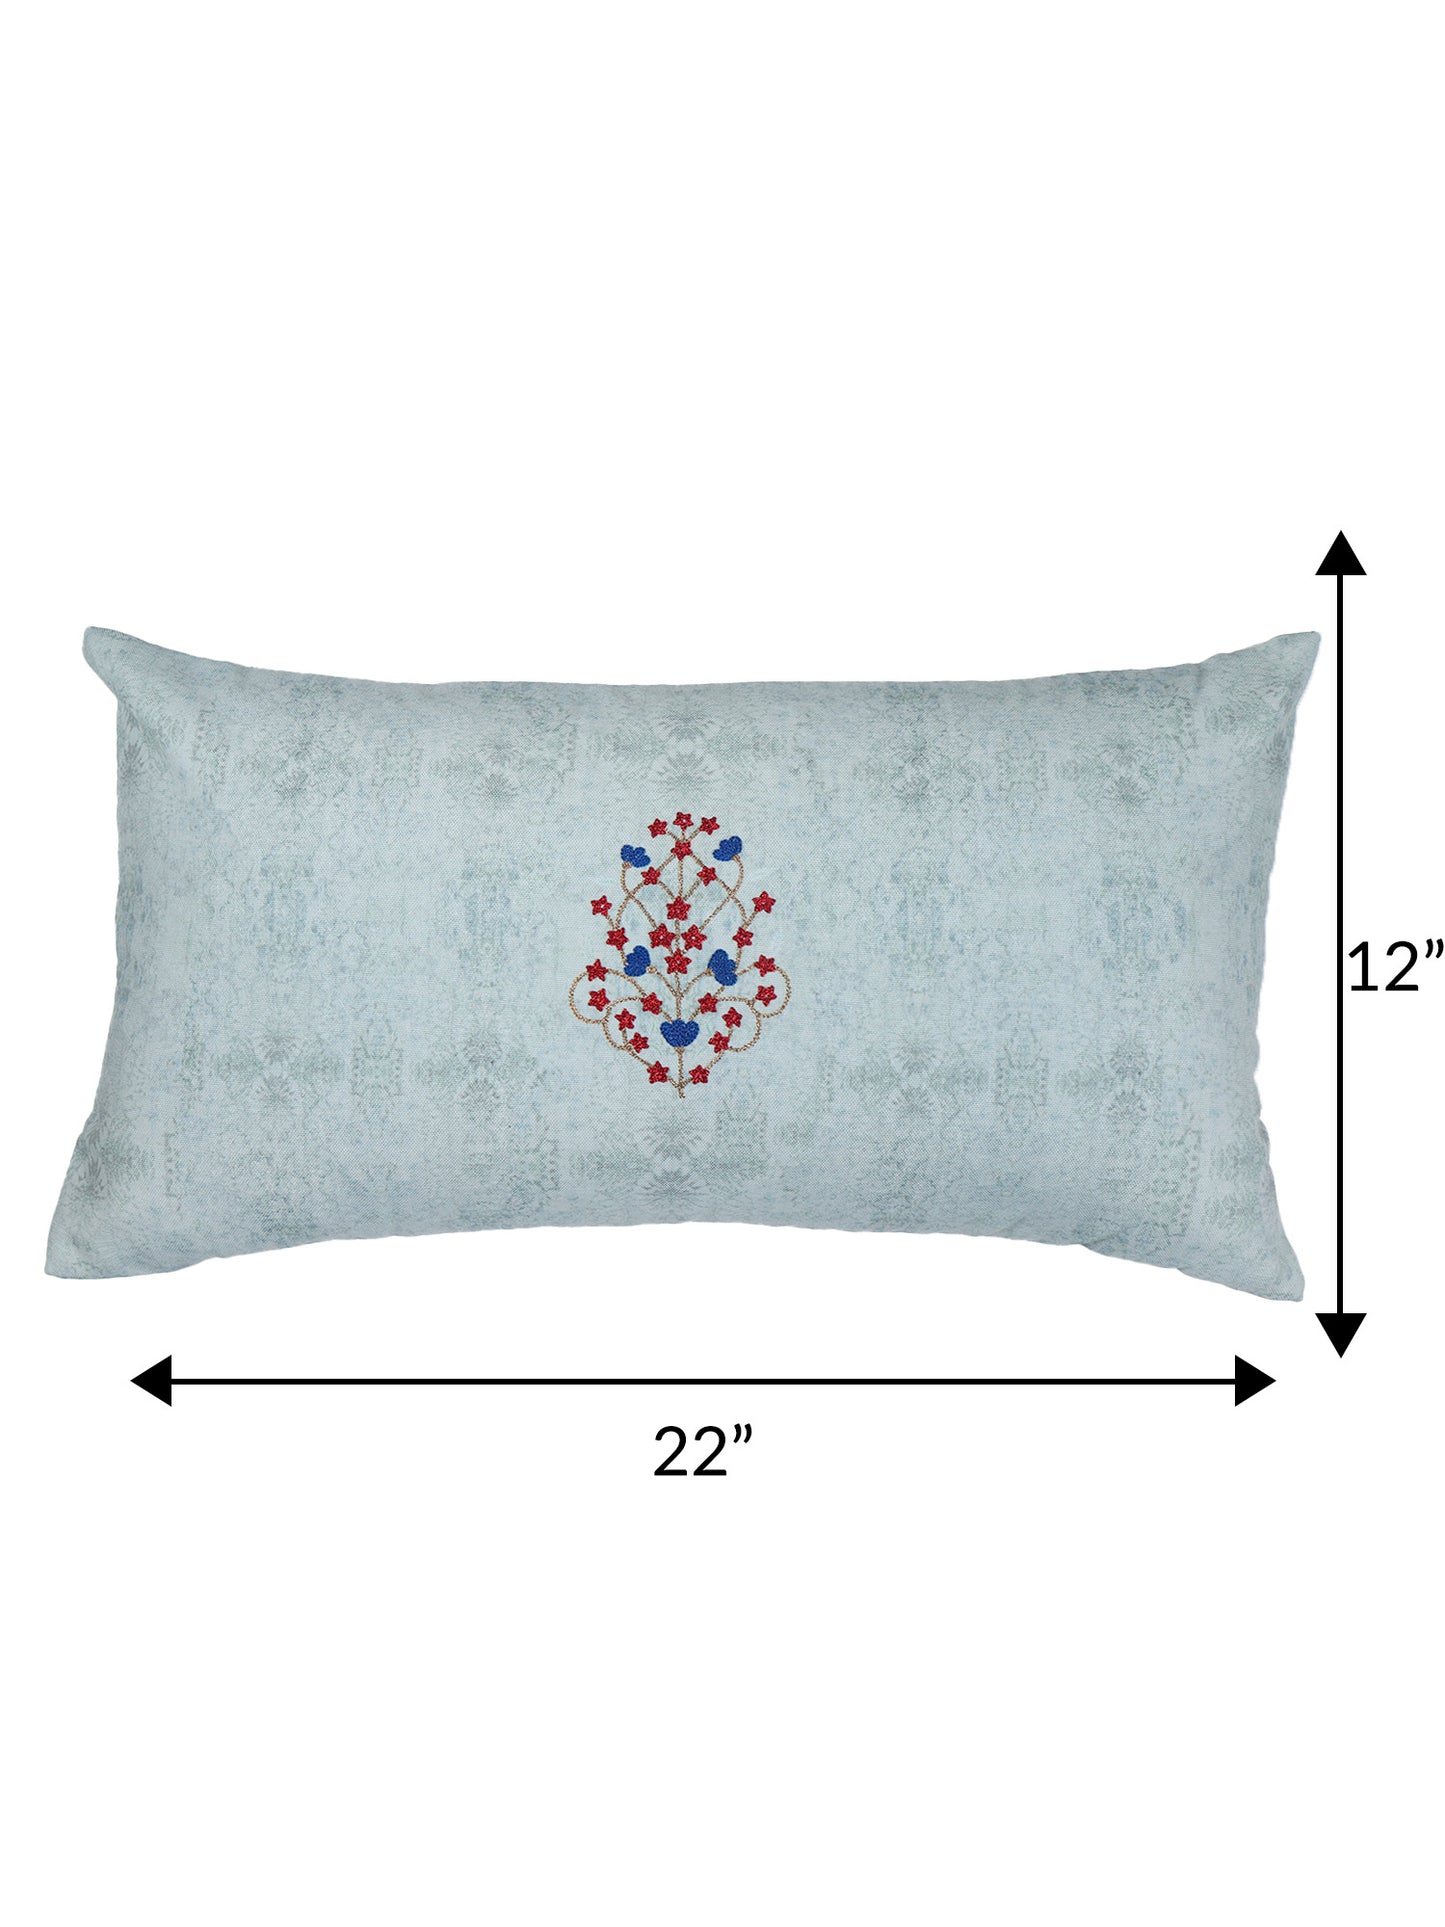 ZEBA World Rectangular Cushion Cover for Sofa - Lumbar Cushion | Hand Embroidery on Floral Print - Polycanvas | Mint - 12x22in(30x55cm) (Pack of 1)